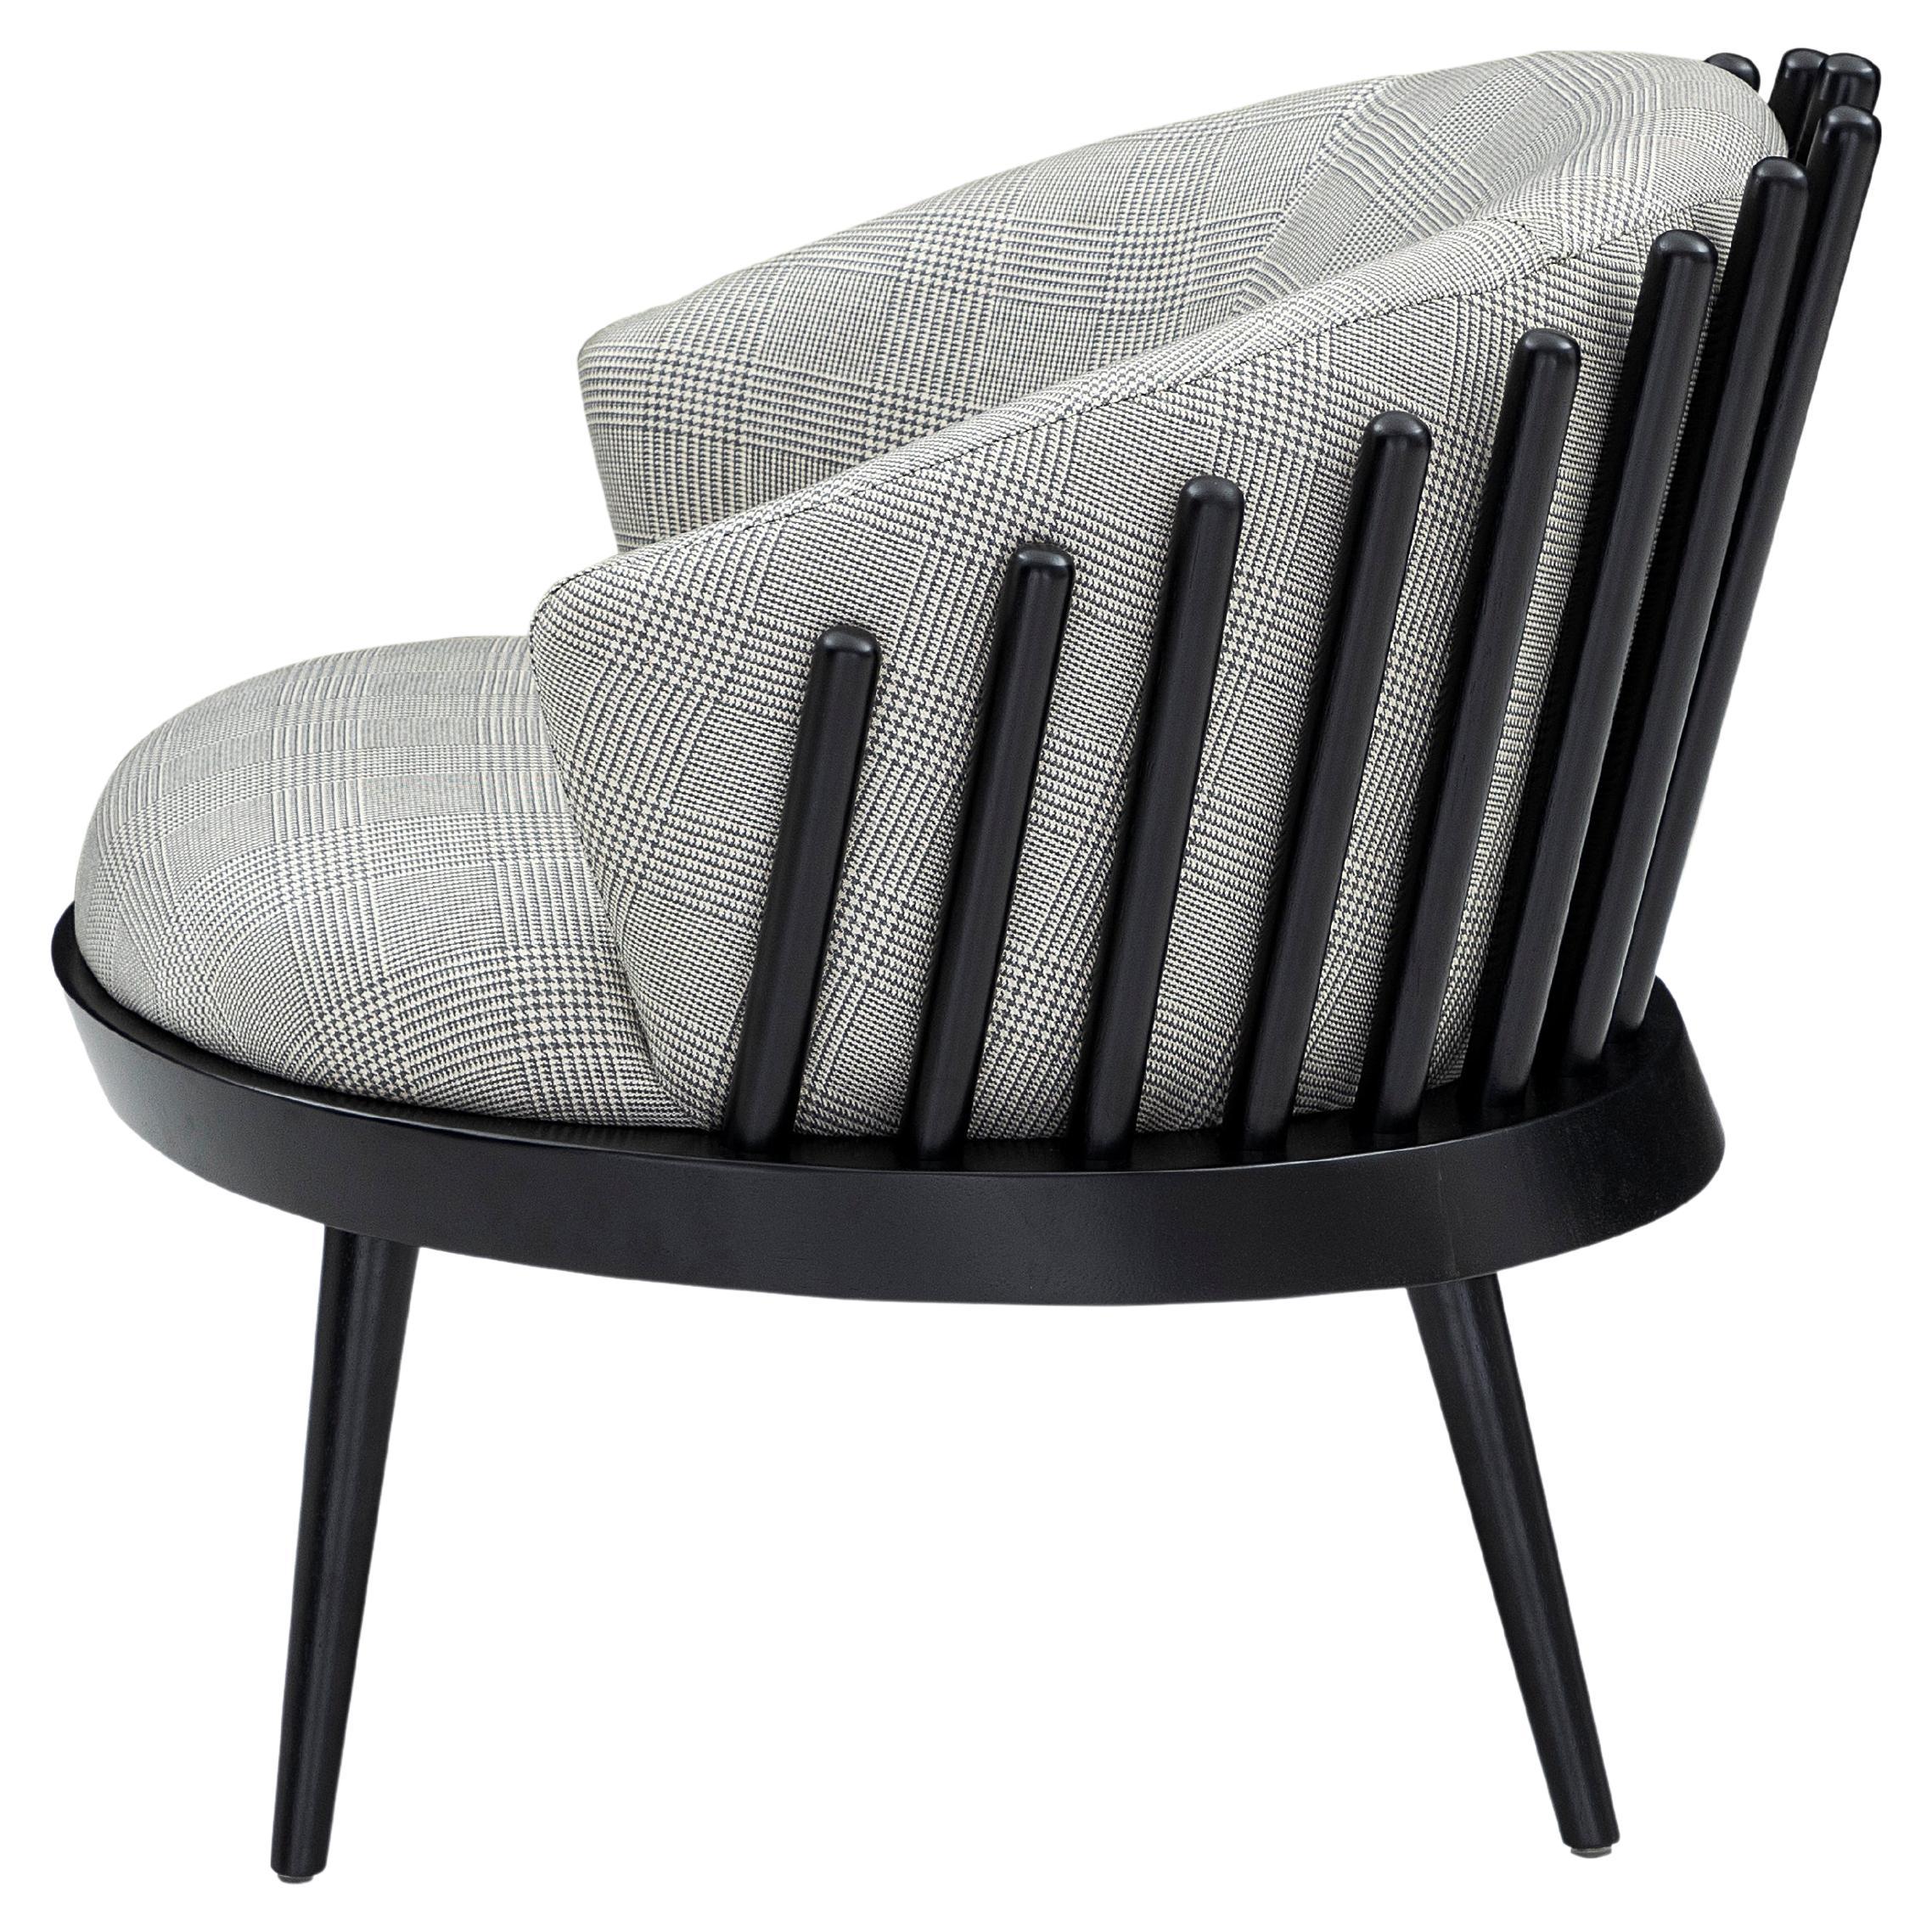 The Uultis design team has created this beautiful Fane armchair, upholstered with a beautiful and soft plaid fabric, feature with a black wood finish. This beautiful creation will provide a perfect comfortable space with its cushion seat and back,